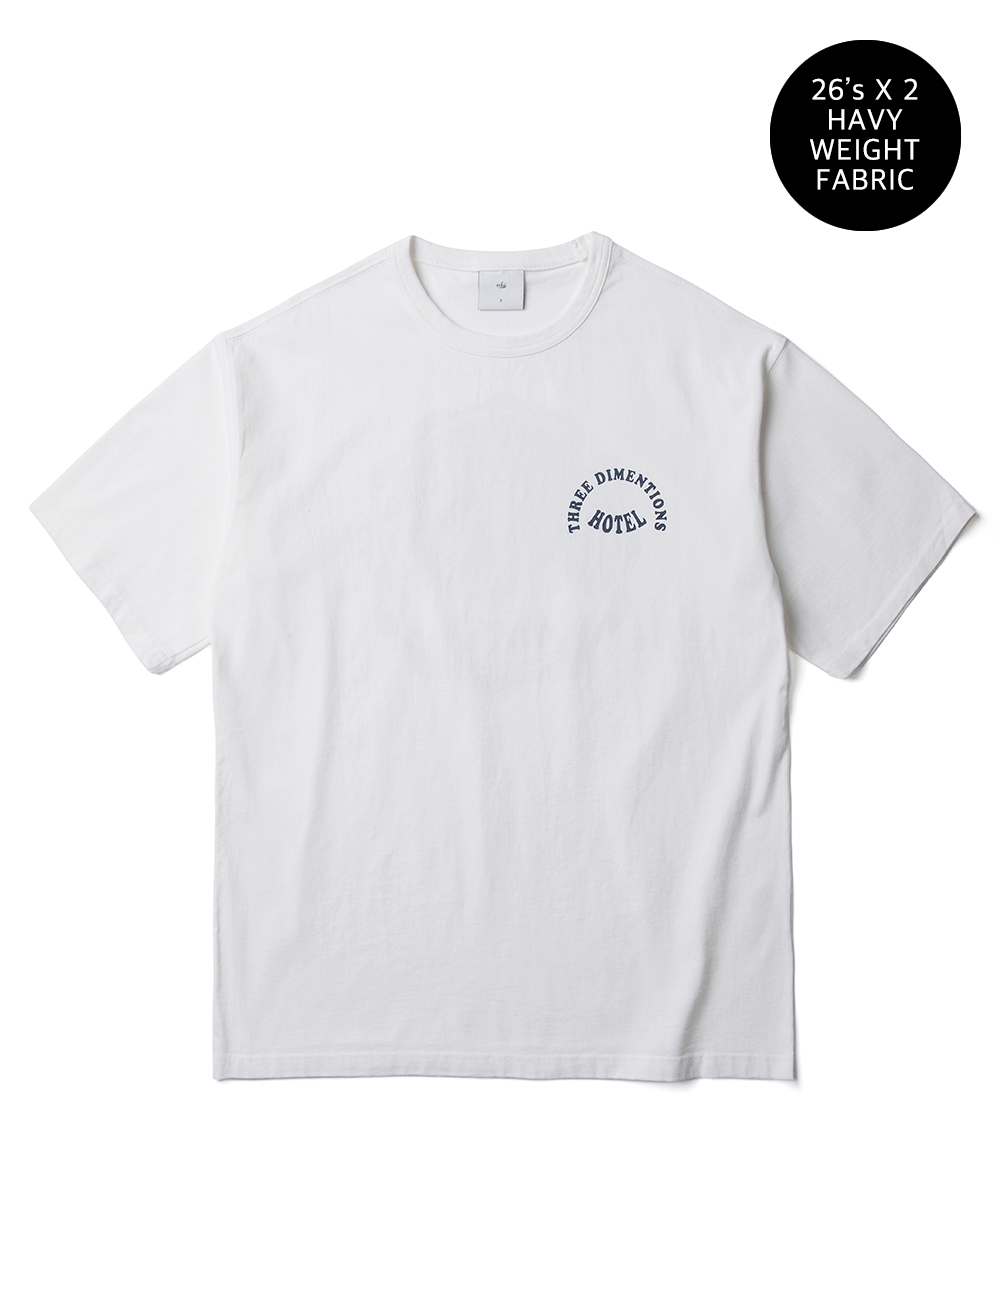 THREE DIMENSIONS HOTEL TEE (OFF WHITE)